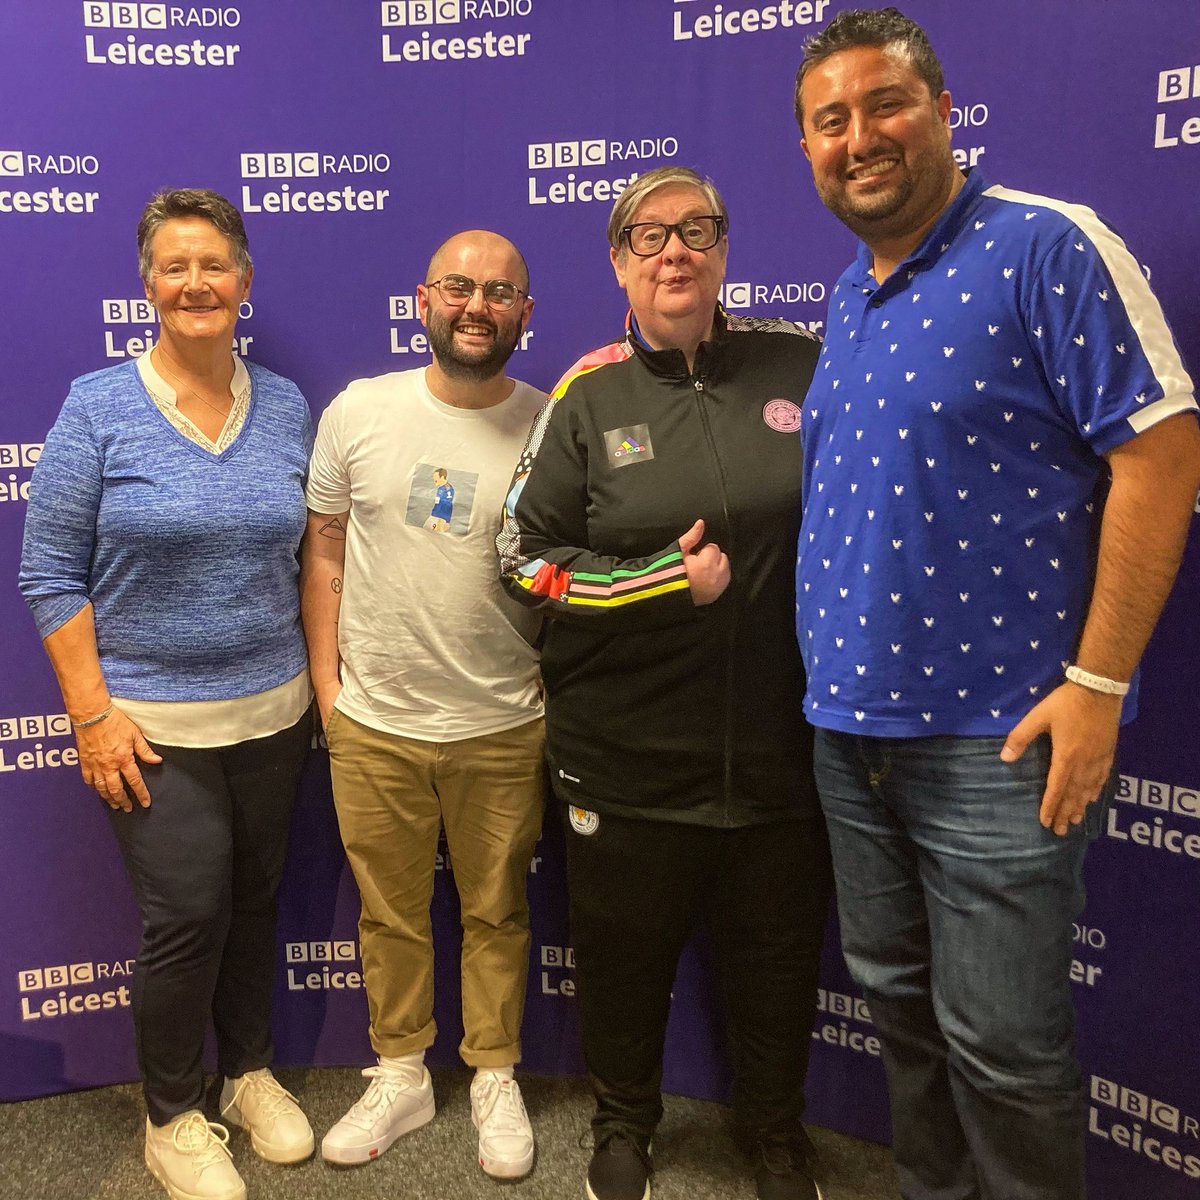 Huge thanks to Rishi, Kate & Fiona from @FoxesPride for popping in to @BBCLeicester today.

We recorded an open and honest chat focusing on how LGBT fans are feeling about the World Cup in Qatar. It’ll be available on the When You’re Smiling podcast later this week.
#LCFC 💙🦊🌈